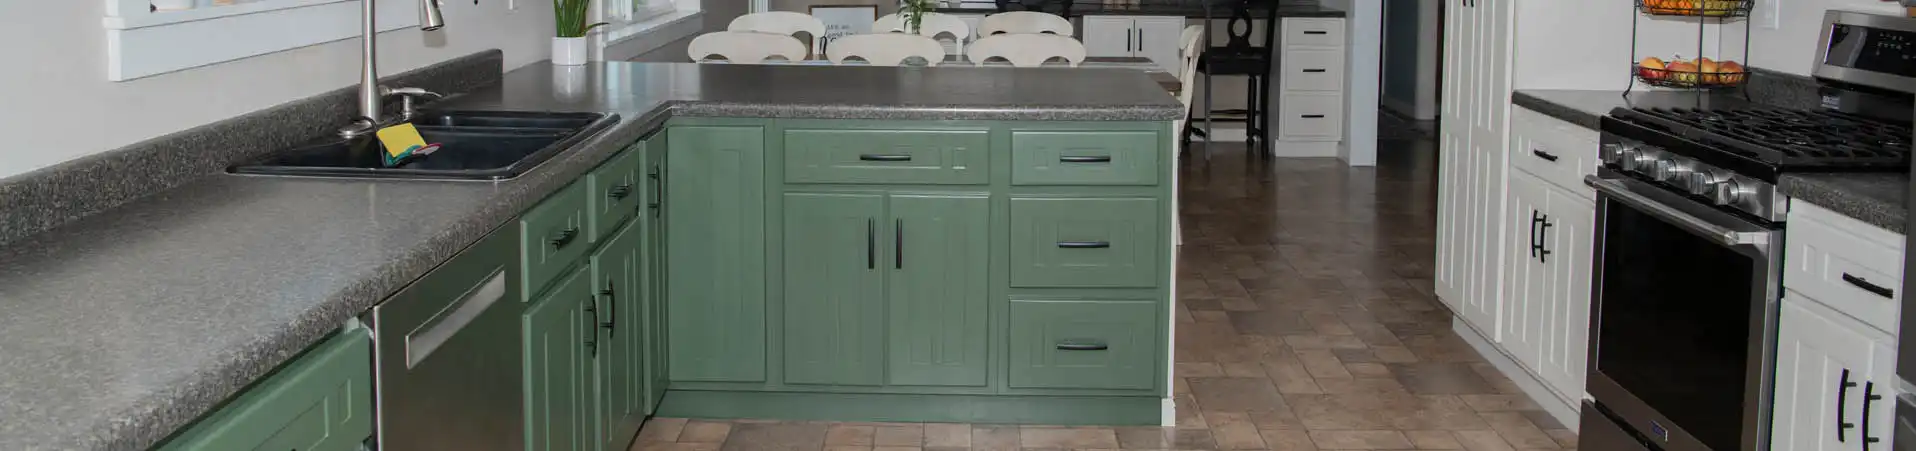 Photo of kitchen with custom dark green paint color